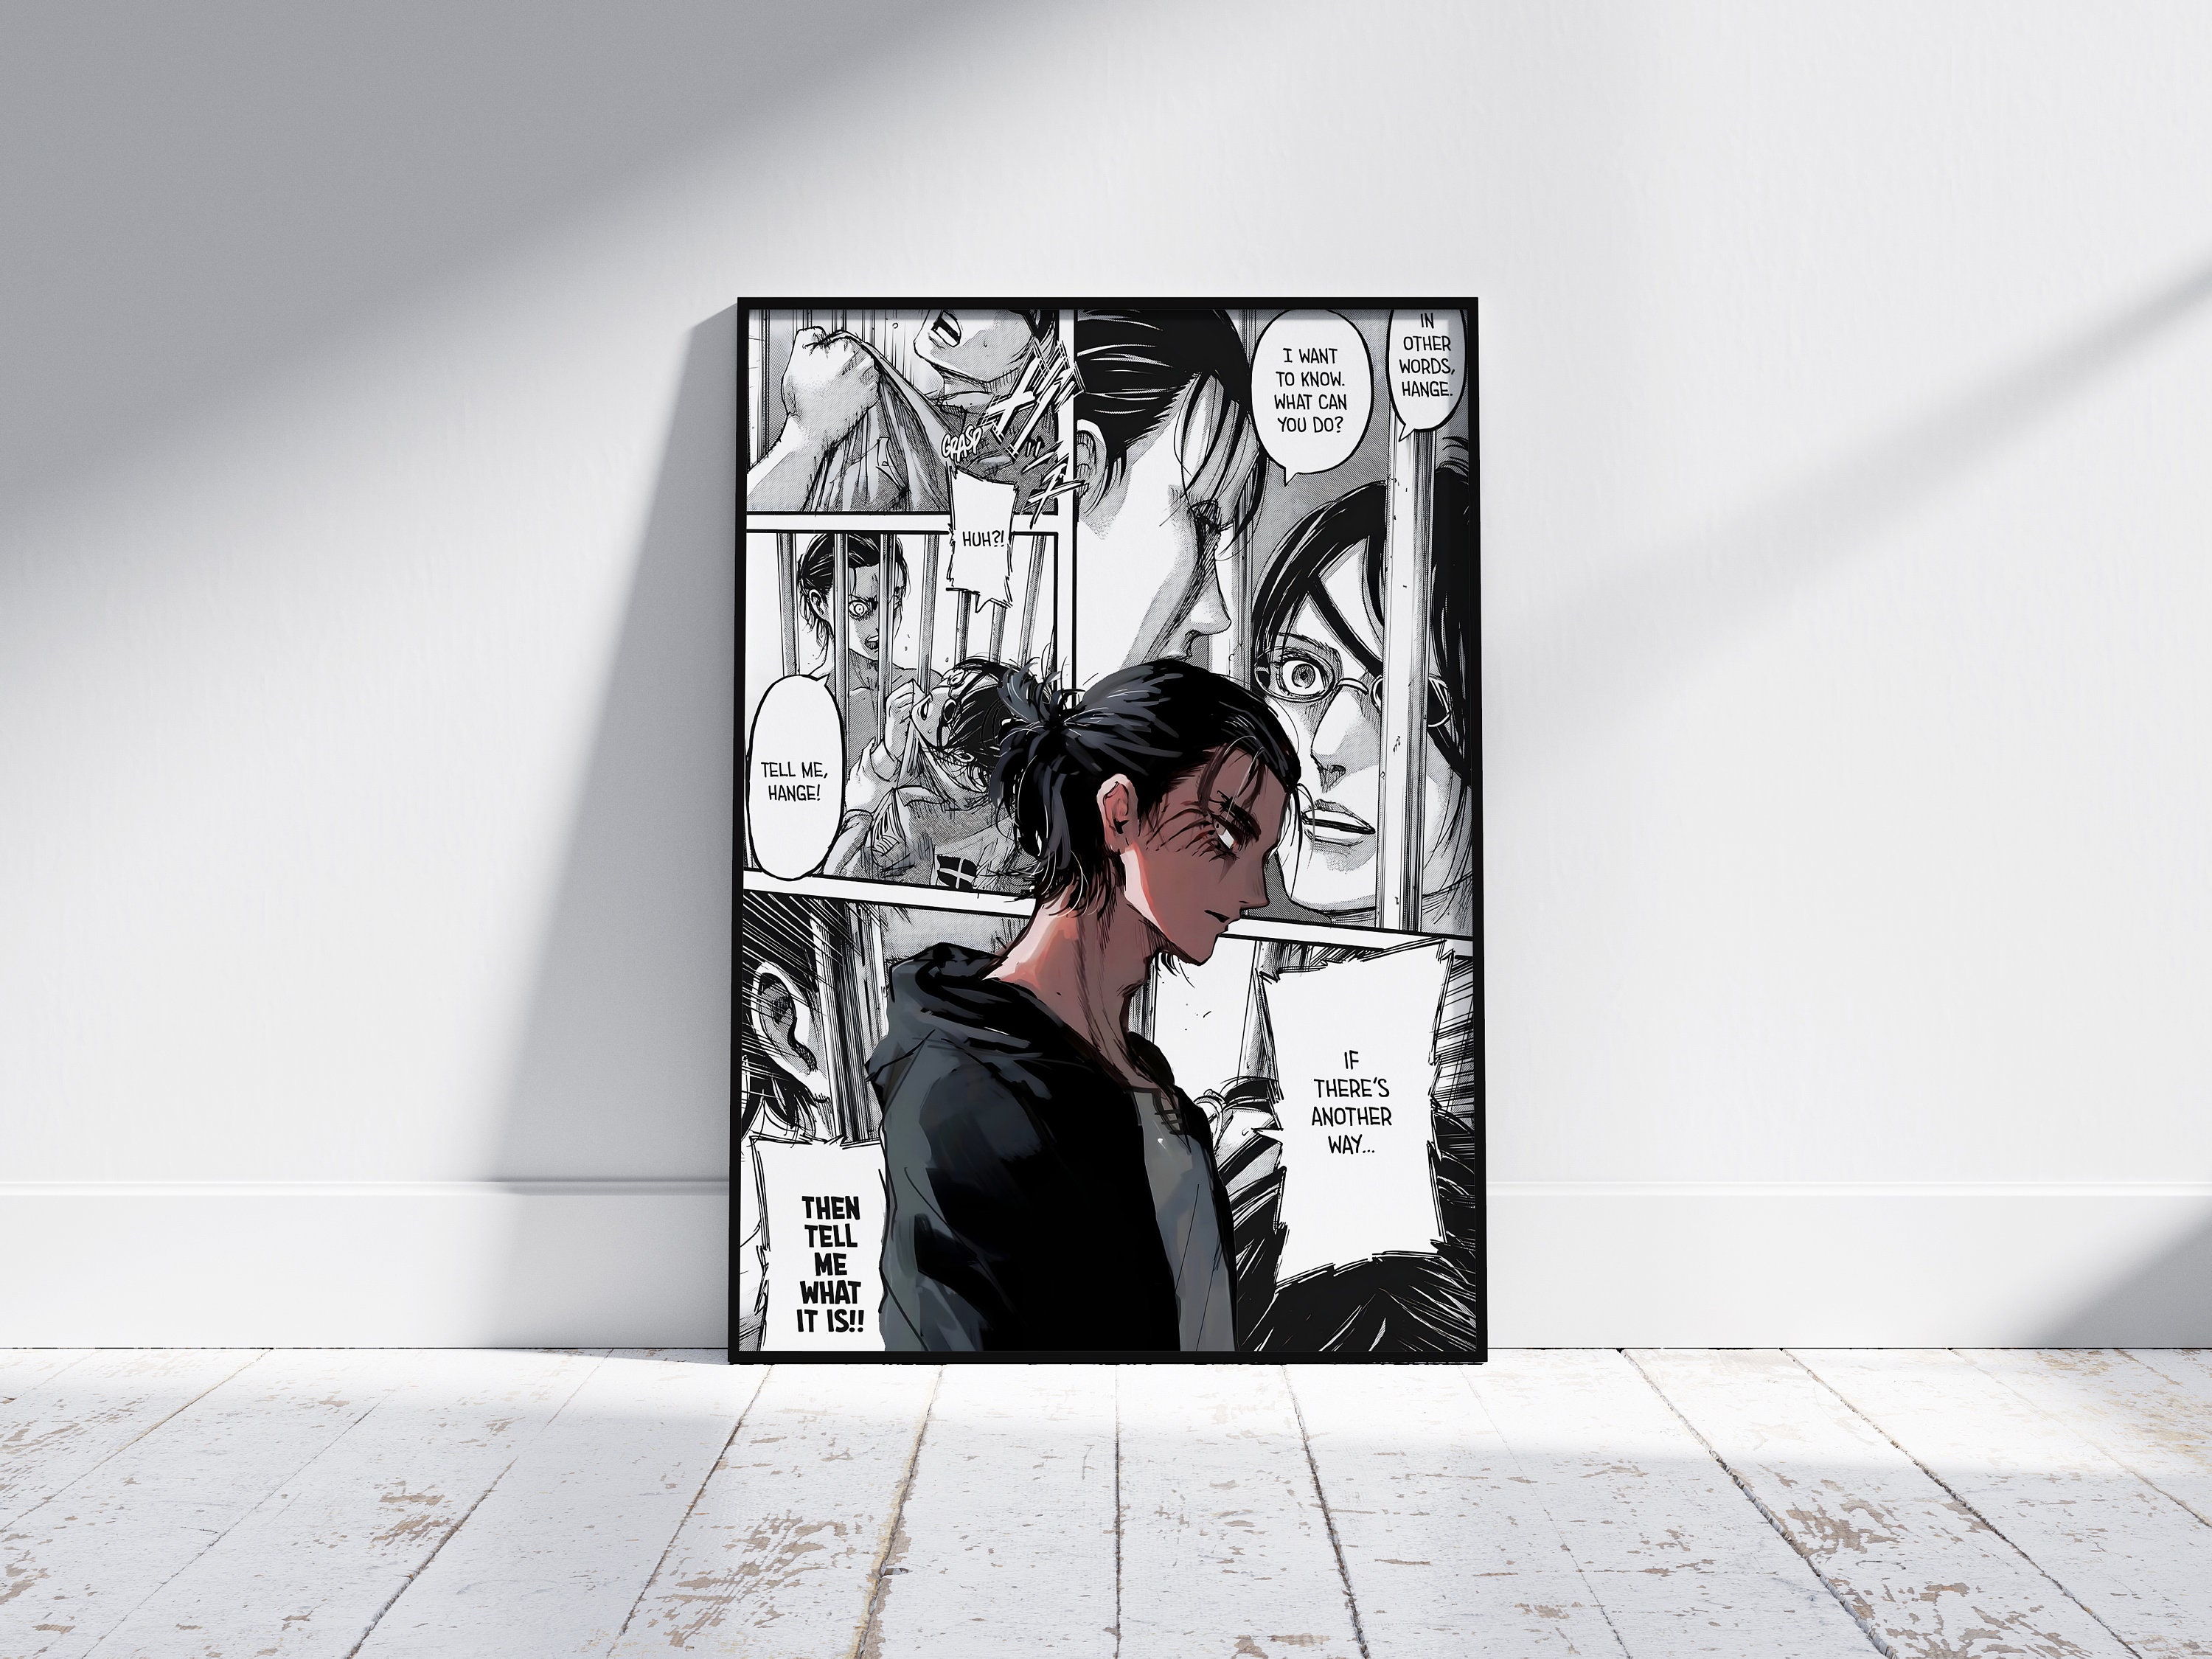 VEENSHI set of 20 attack on titan manga pages wall poster | A4 size  (11.9x8.3 inch) 300 GSM Poster